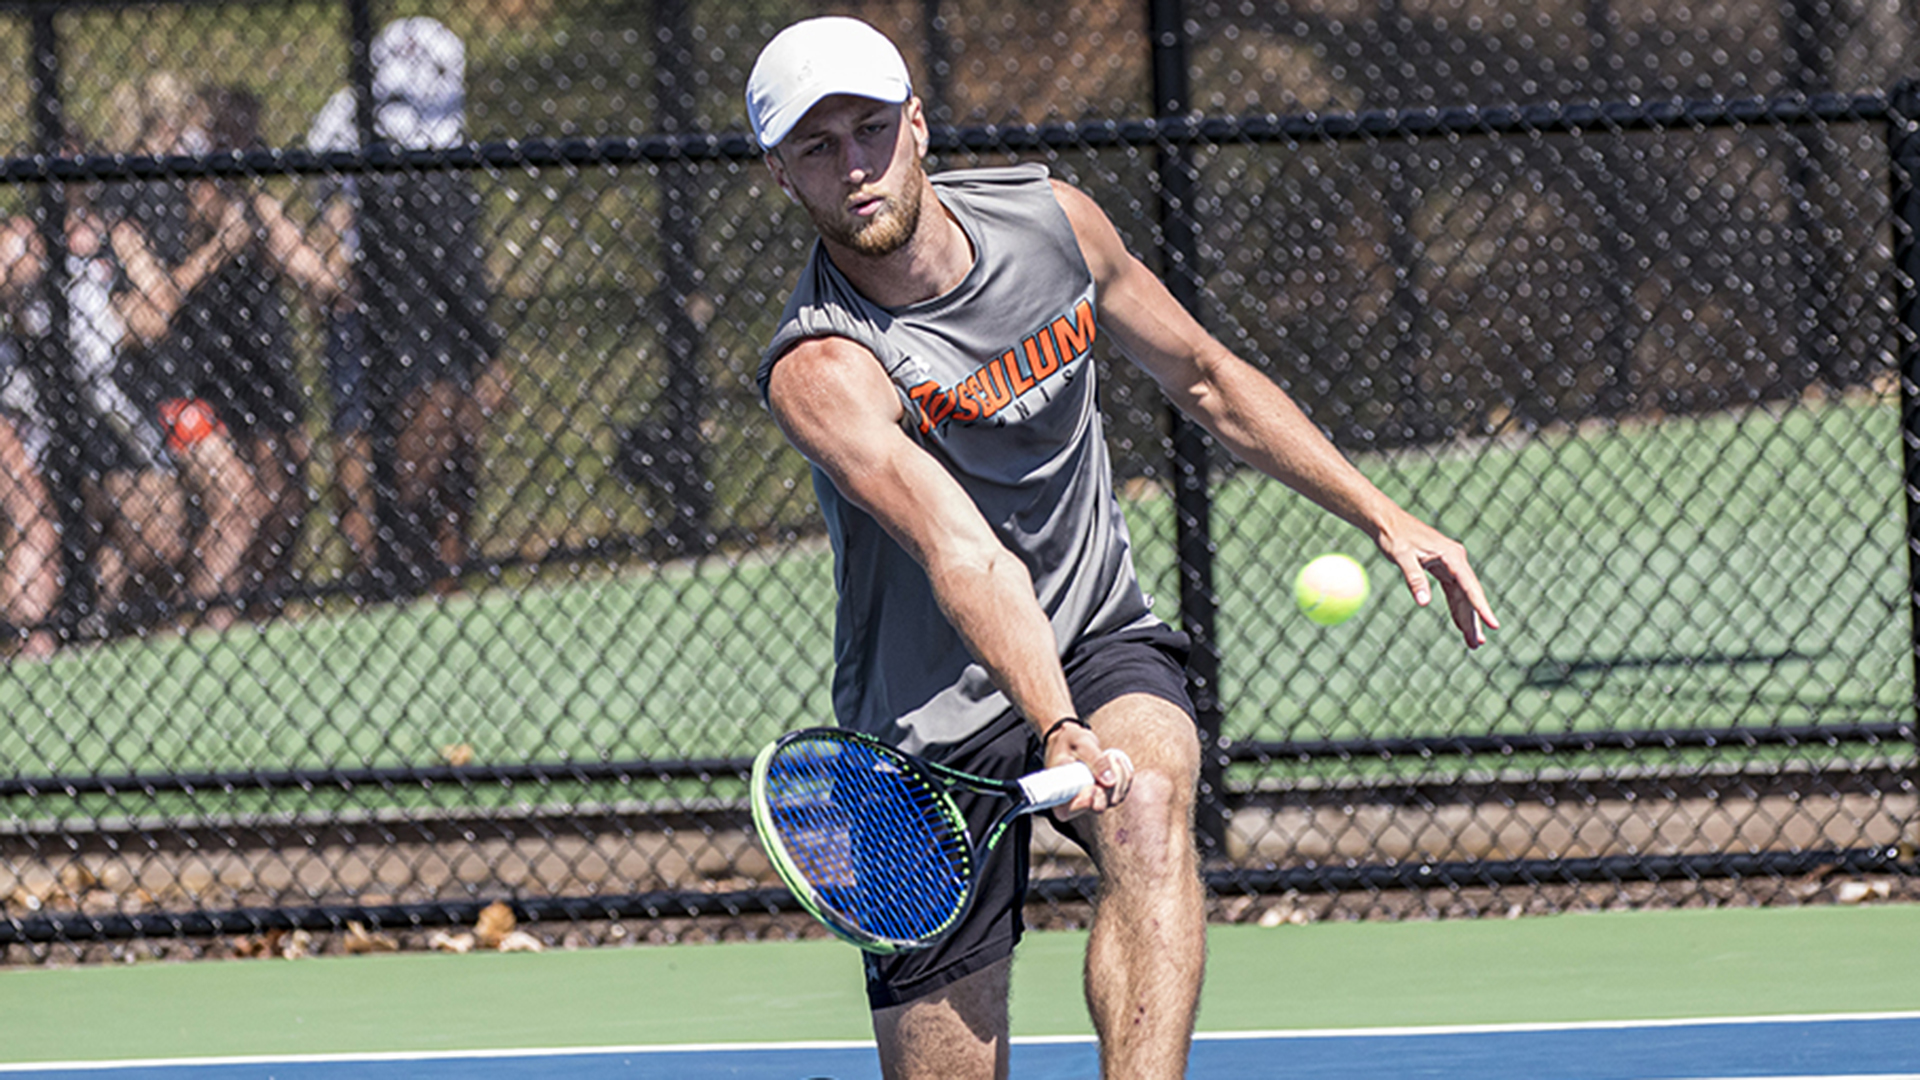 Frank Bonacia picked up wins in both singles and doubles for the Pioneers against Wingate (photo by Chuck Williams)